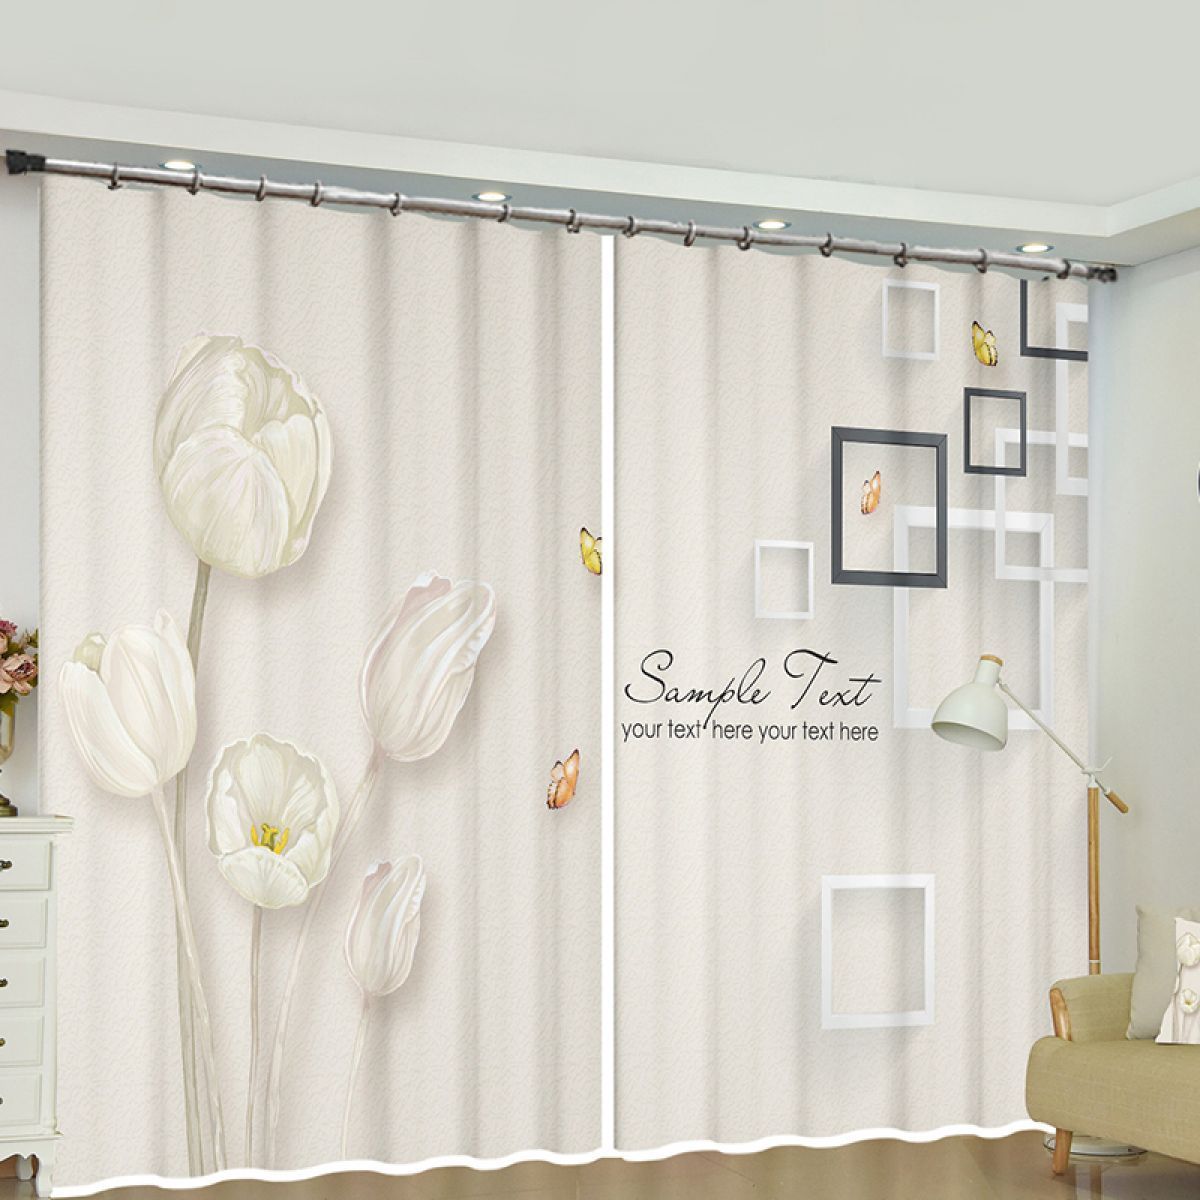 Poppies And Squares Printed Window Curtain Home Decor